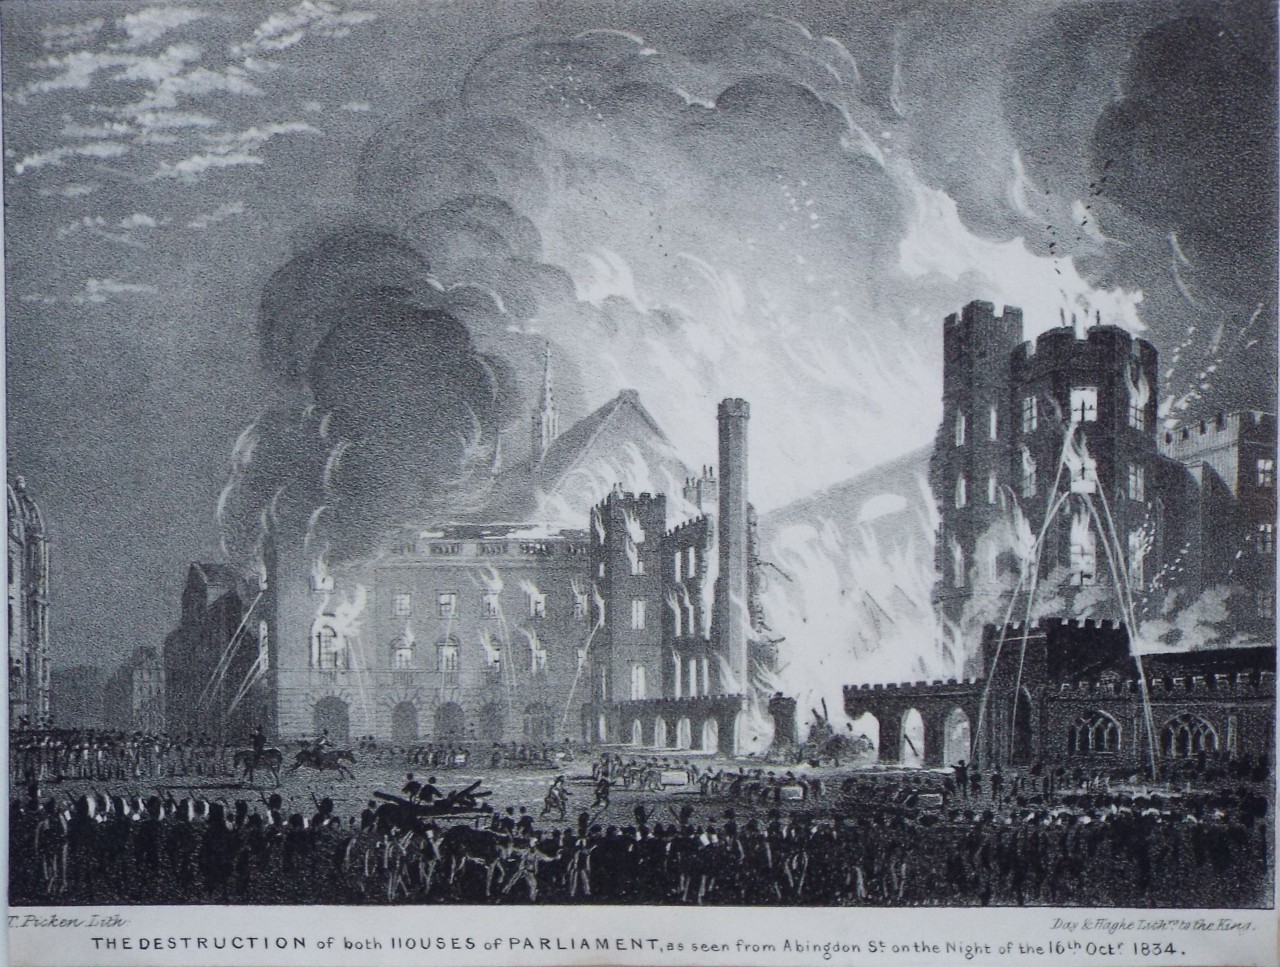 Lithograph - The Destruction by Fire of Both Houses of Parliament, as seen from Abingdon St. on the night 16th Octr. 1834. - Picken